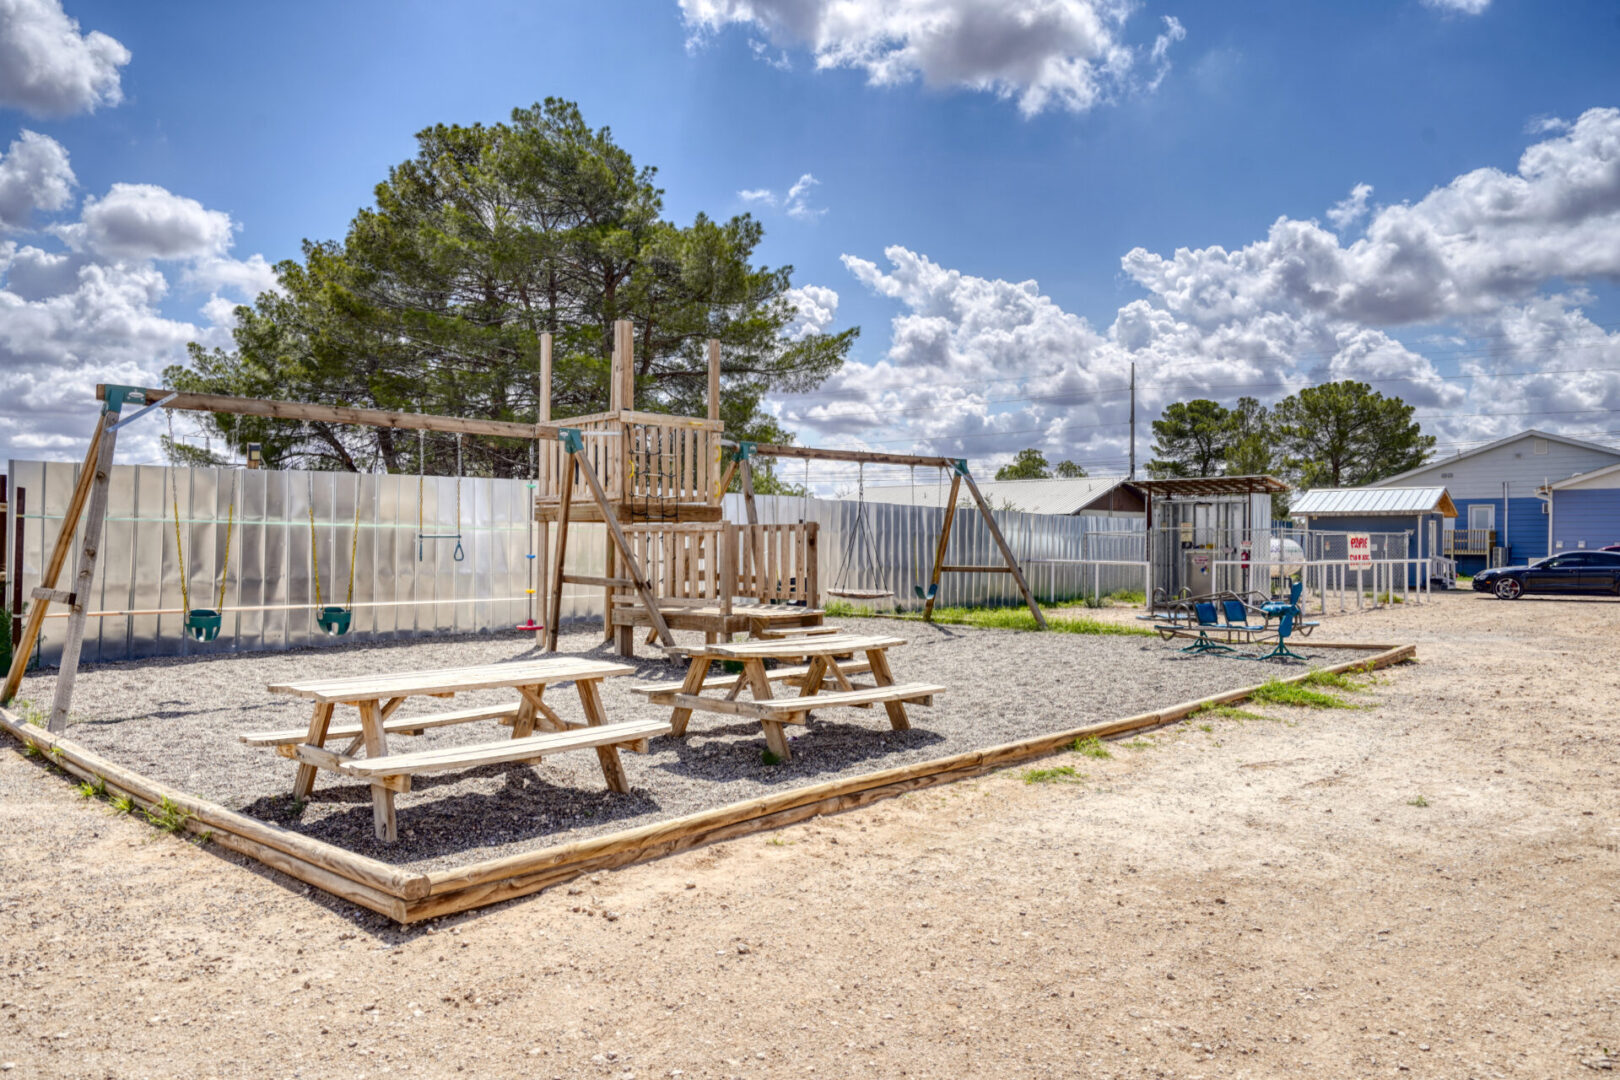 A playground with wooden benches and swings.